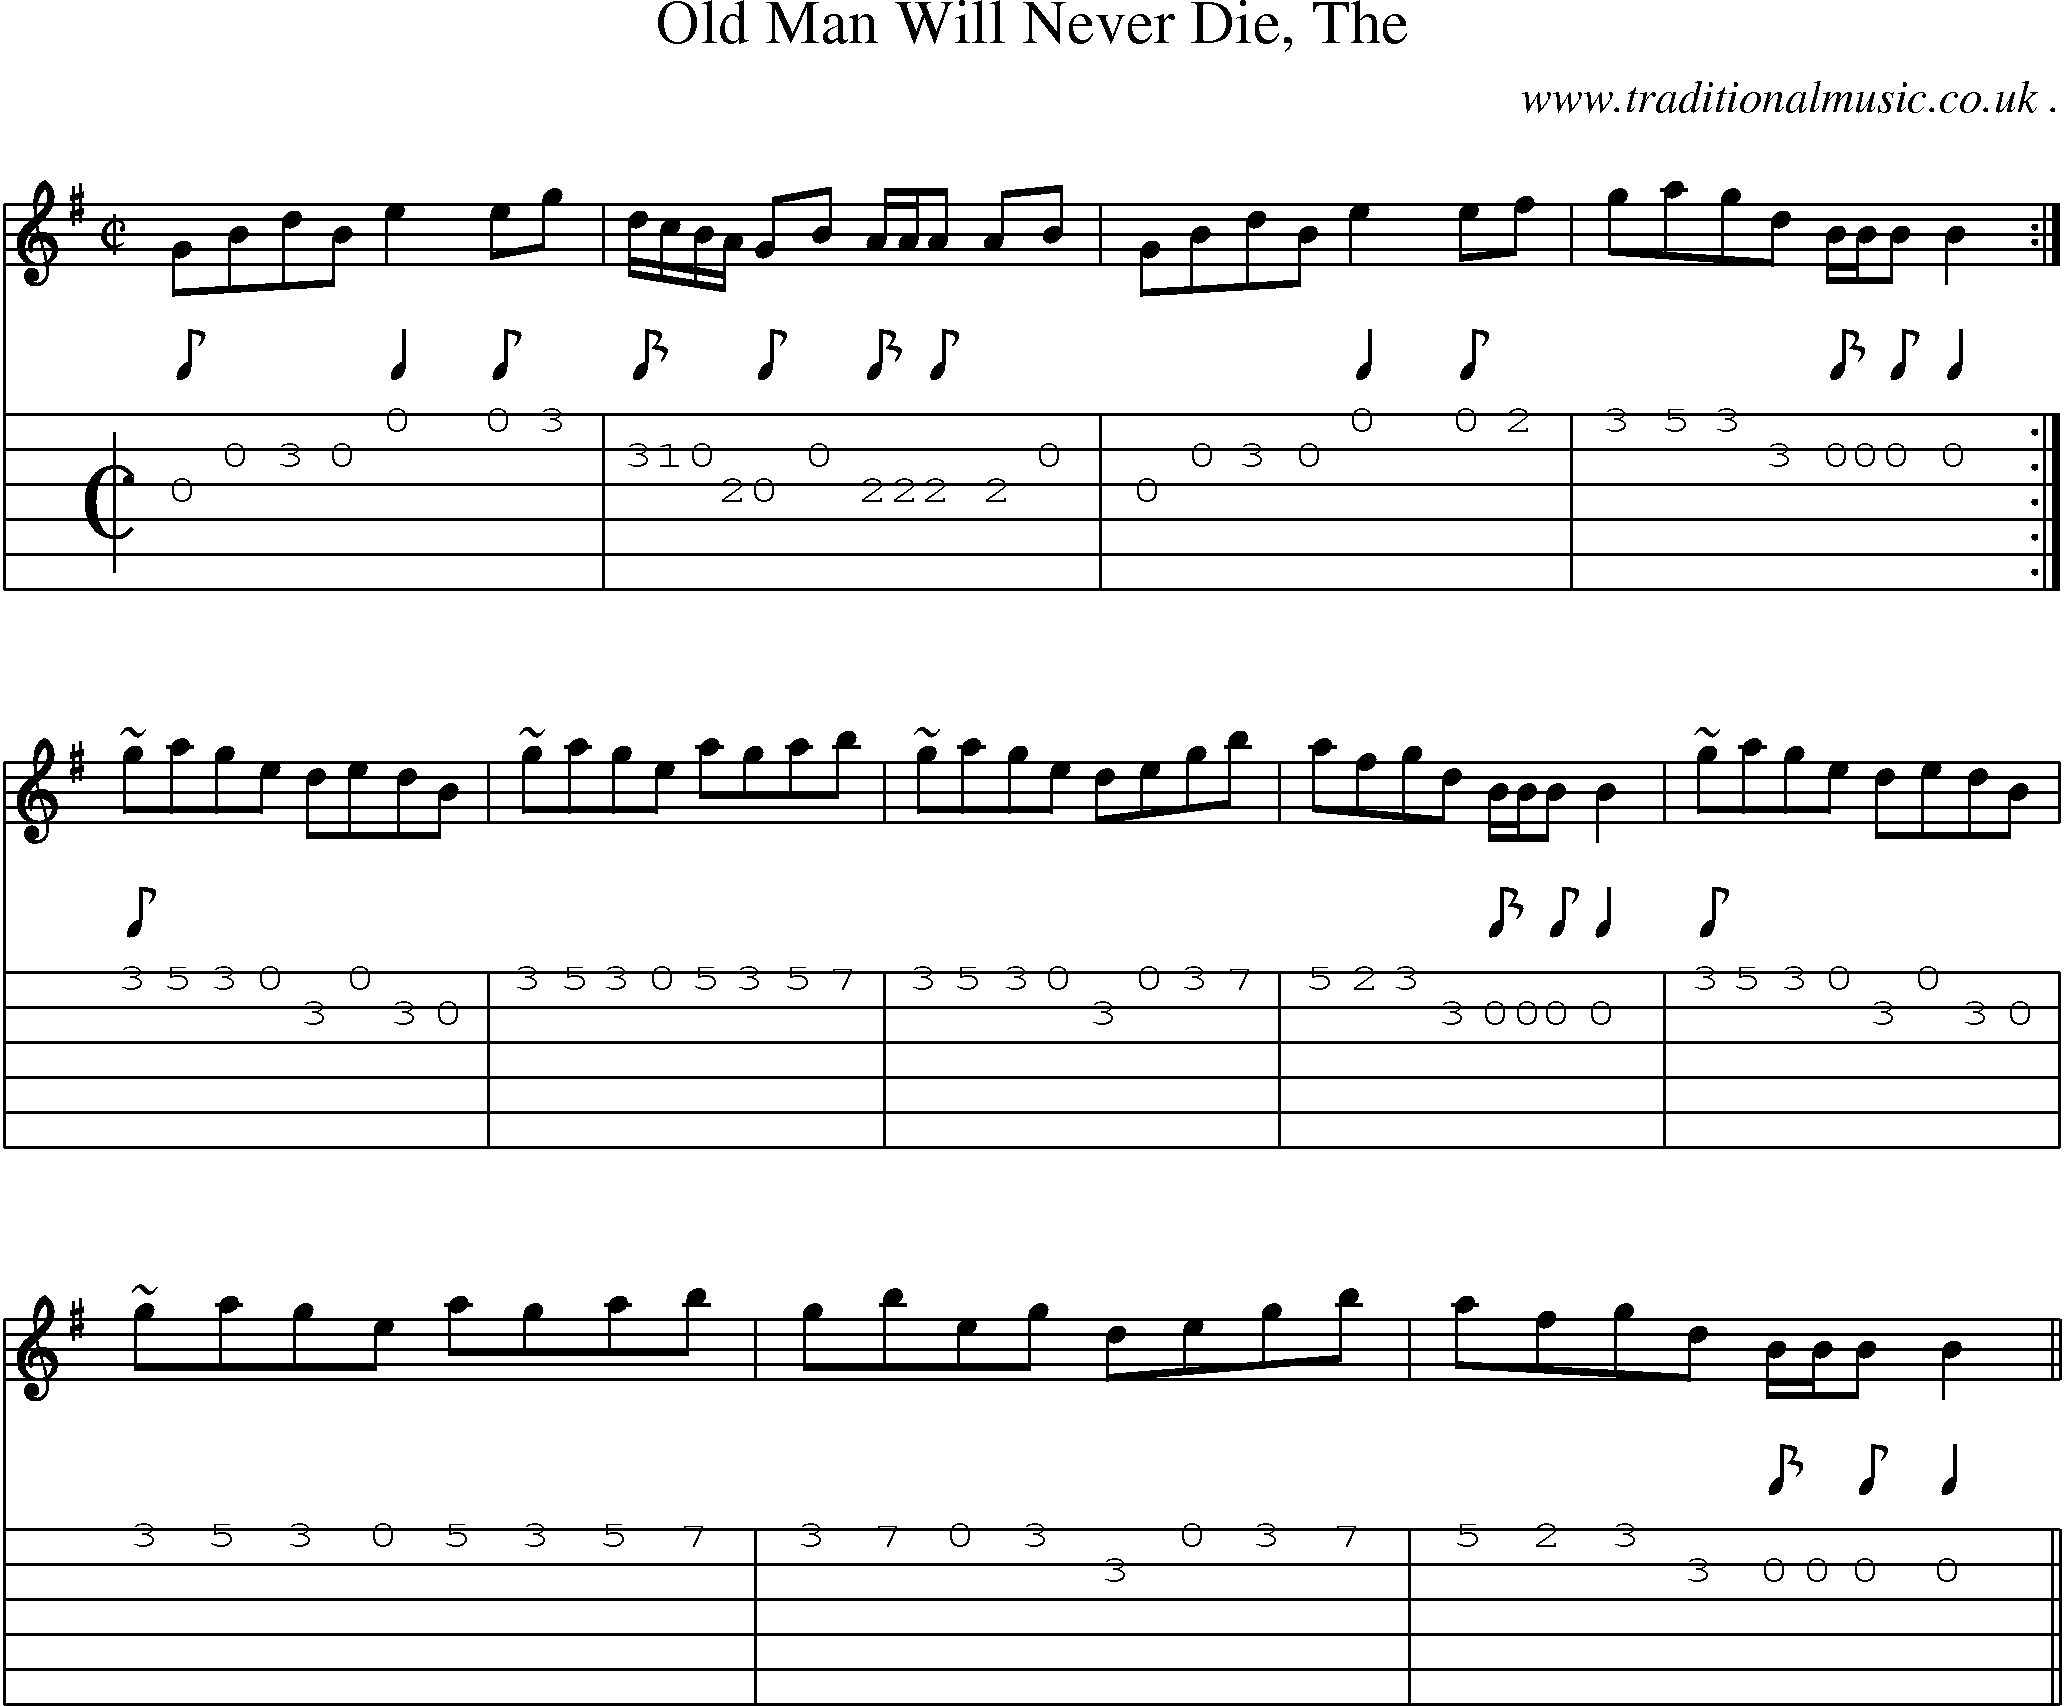 Sheet-music  score, Chords and Guitar Tabs for Old Man Will Never Die The